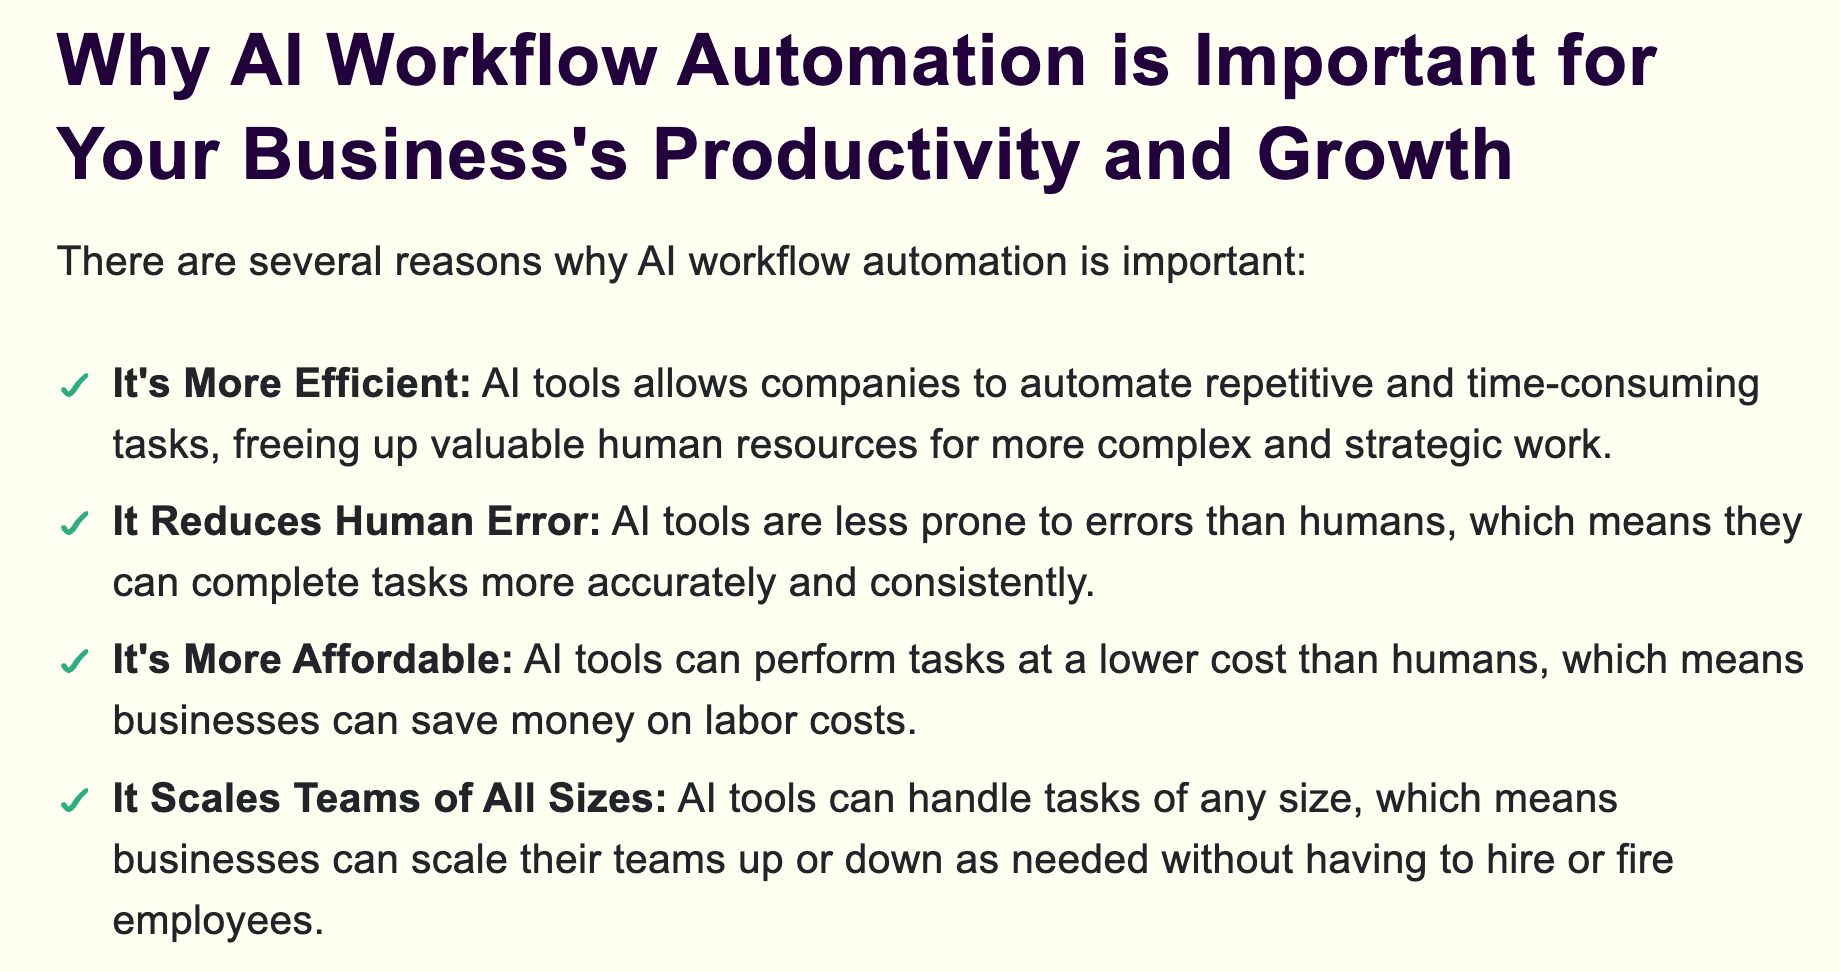 Why AI workflow automation is important for your business's productivity and growth